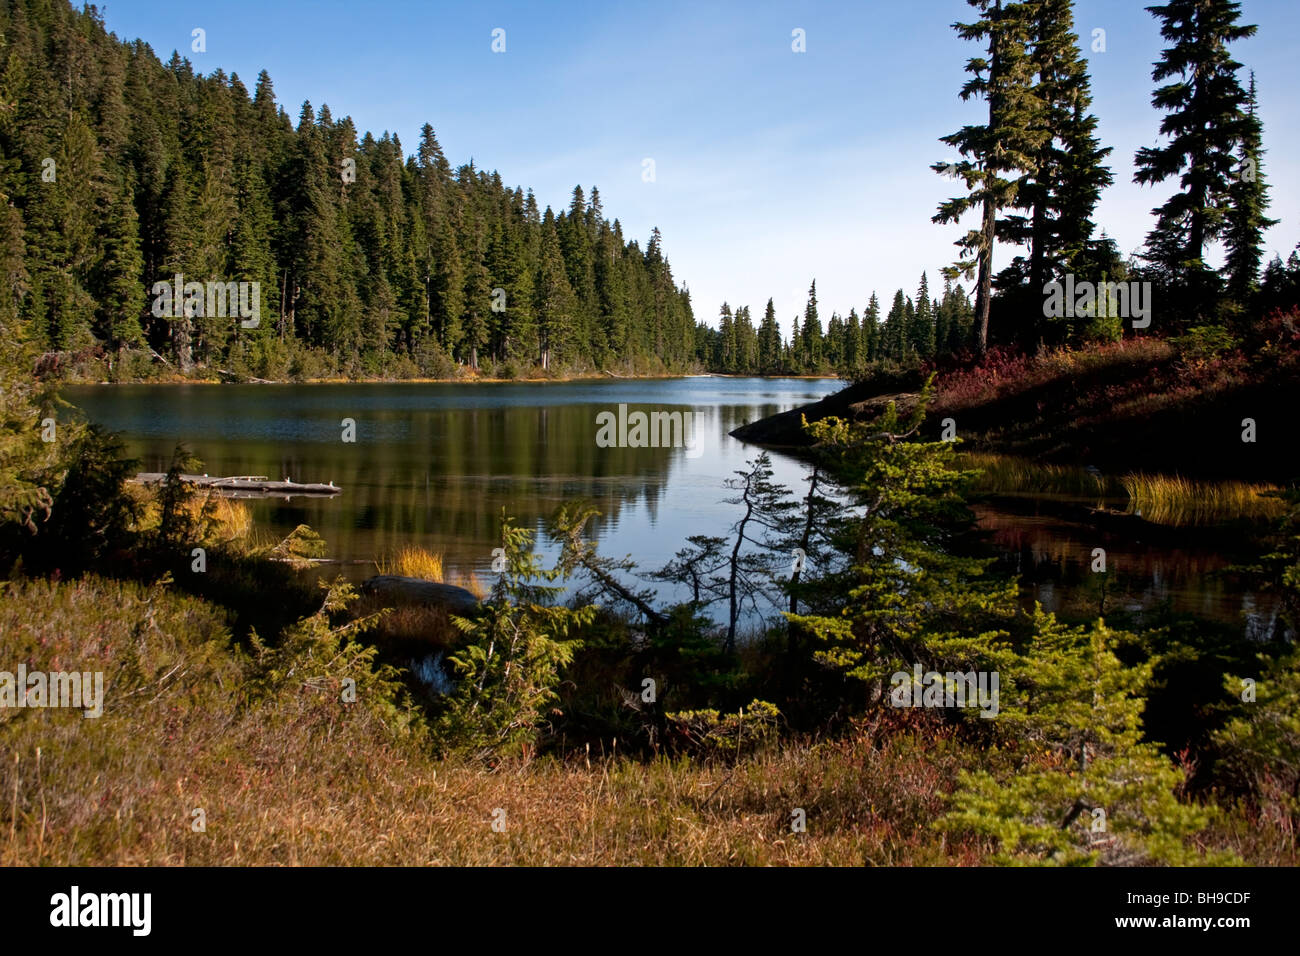 Lady Lake at the Forbidden Plateau Strathcona Park Vancouver Island BC Canada in October Stock Photo